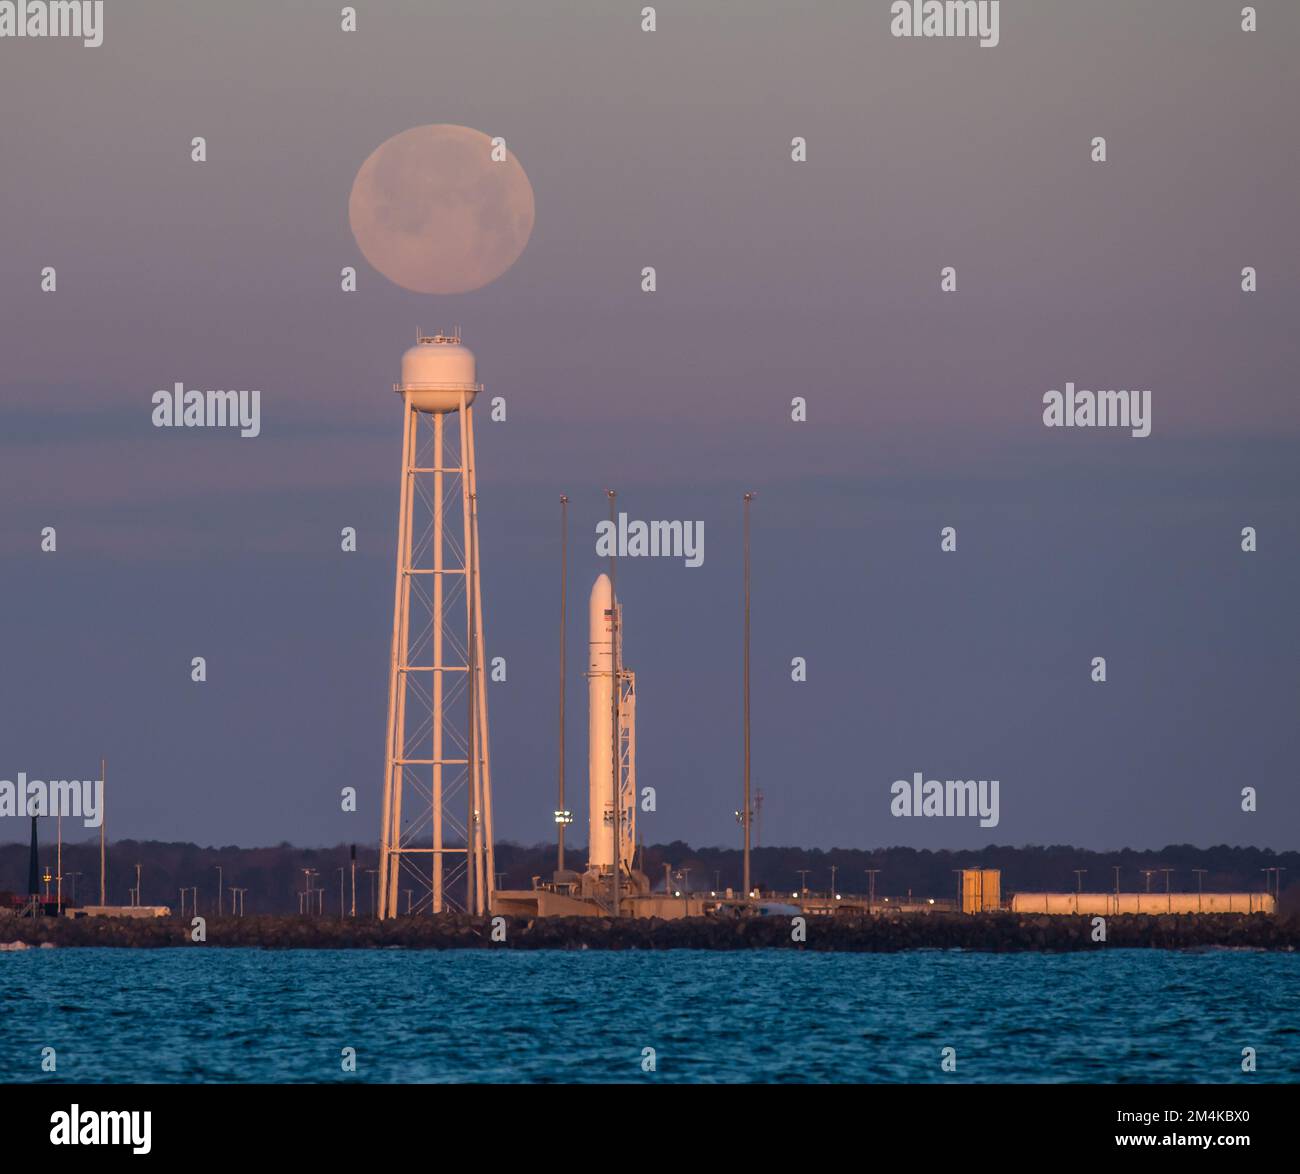 A Northrop Grumman Antares rocket carrying a Cygnus resupply spacecraft during sunrise, soon launching. Digitally enhanced. Elements of image by NASA Stock Photo